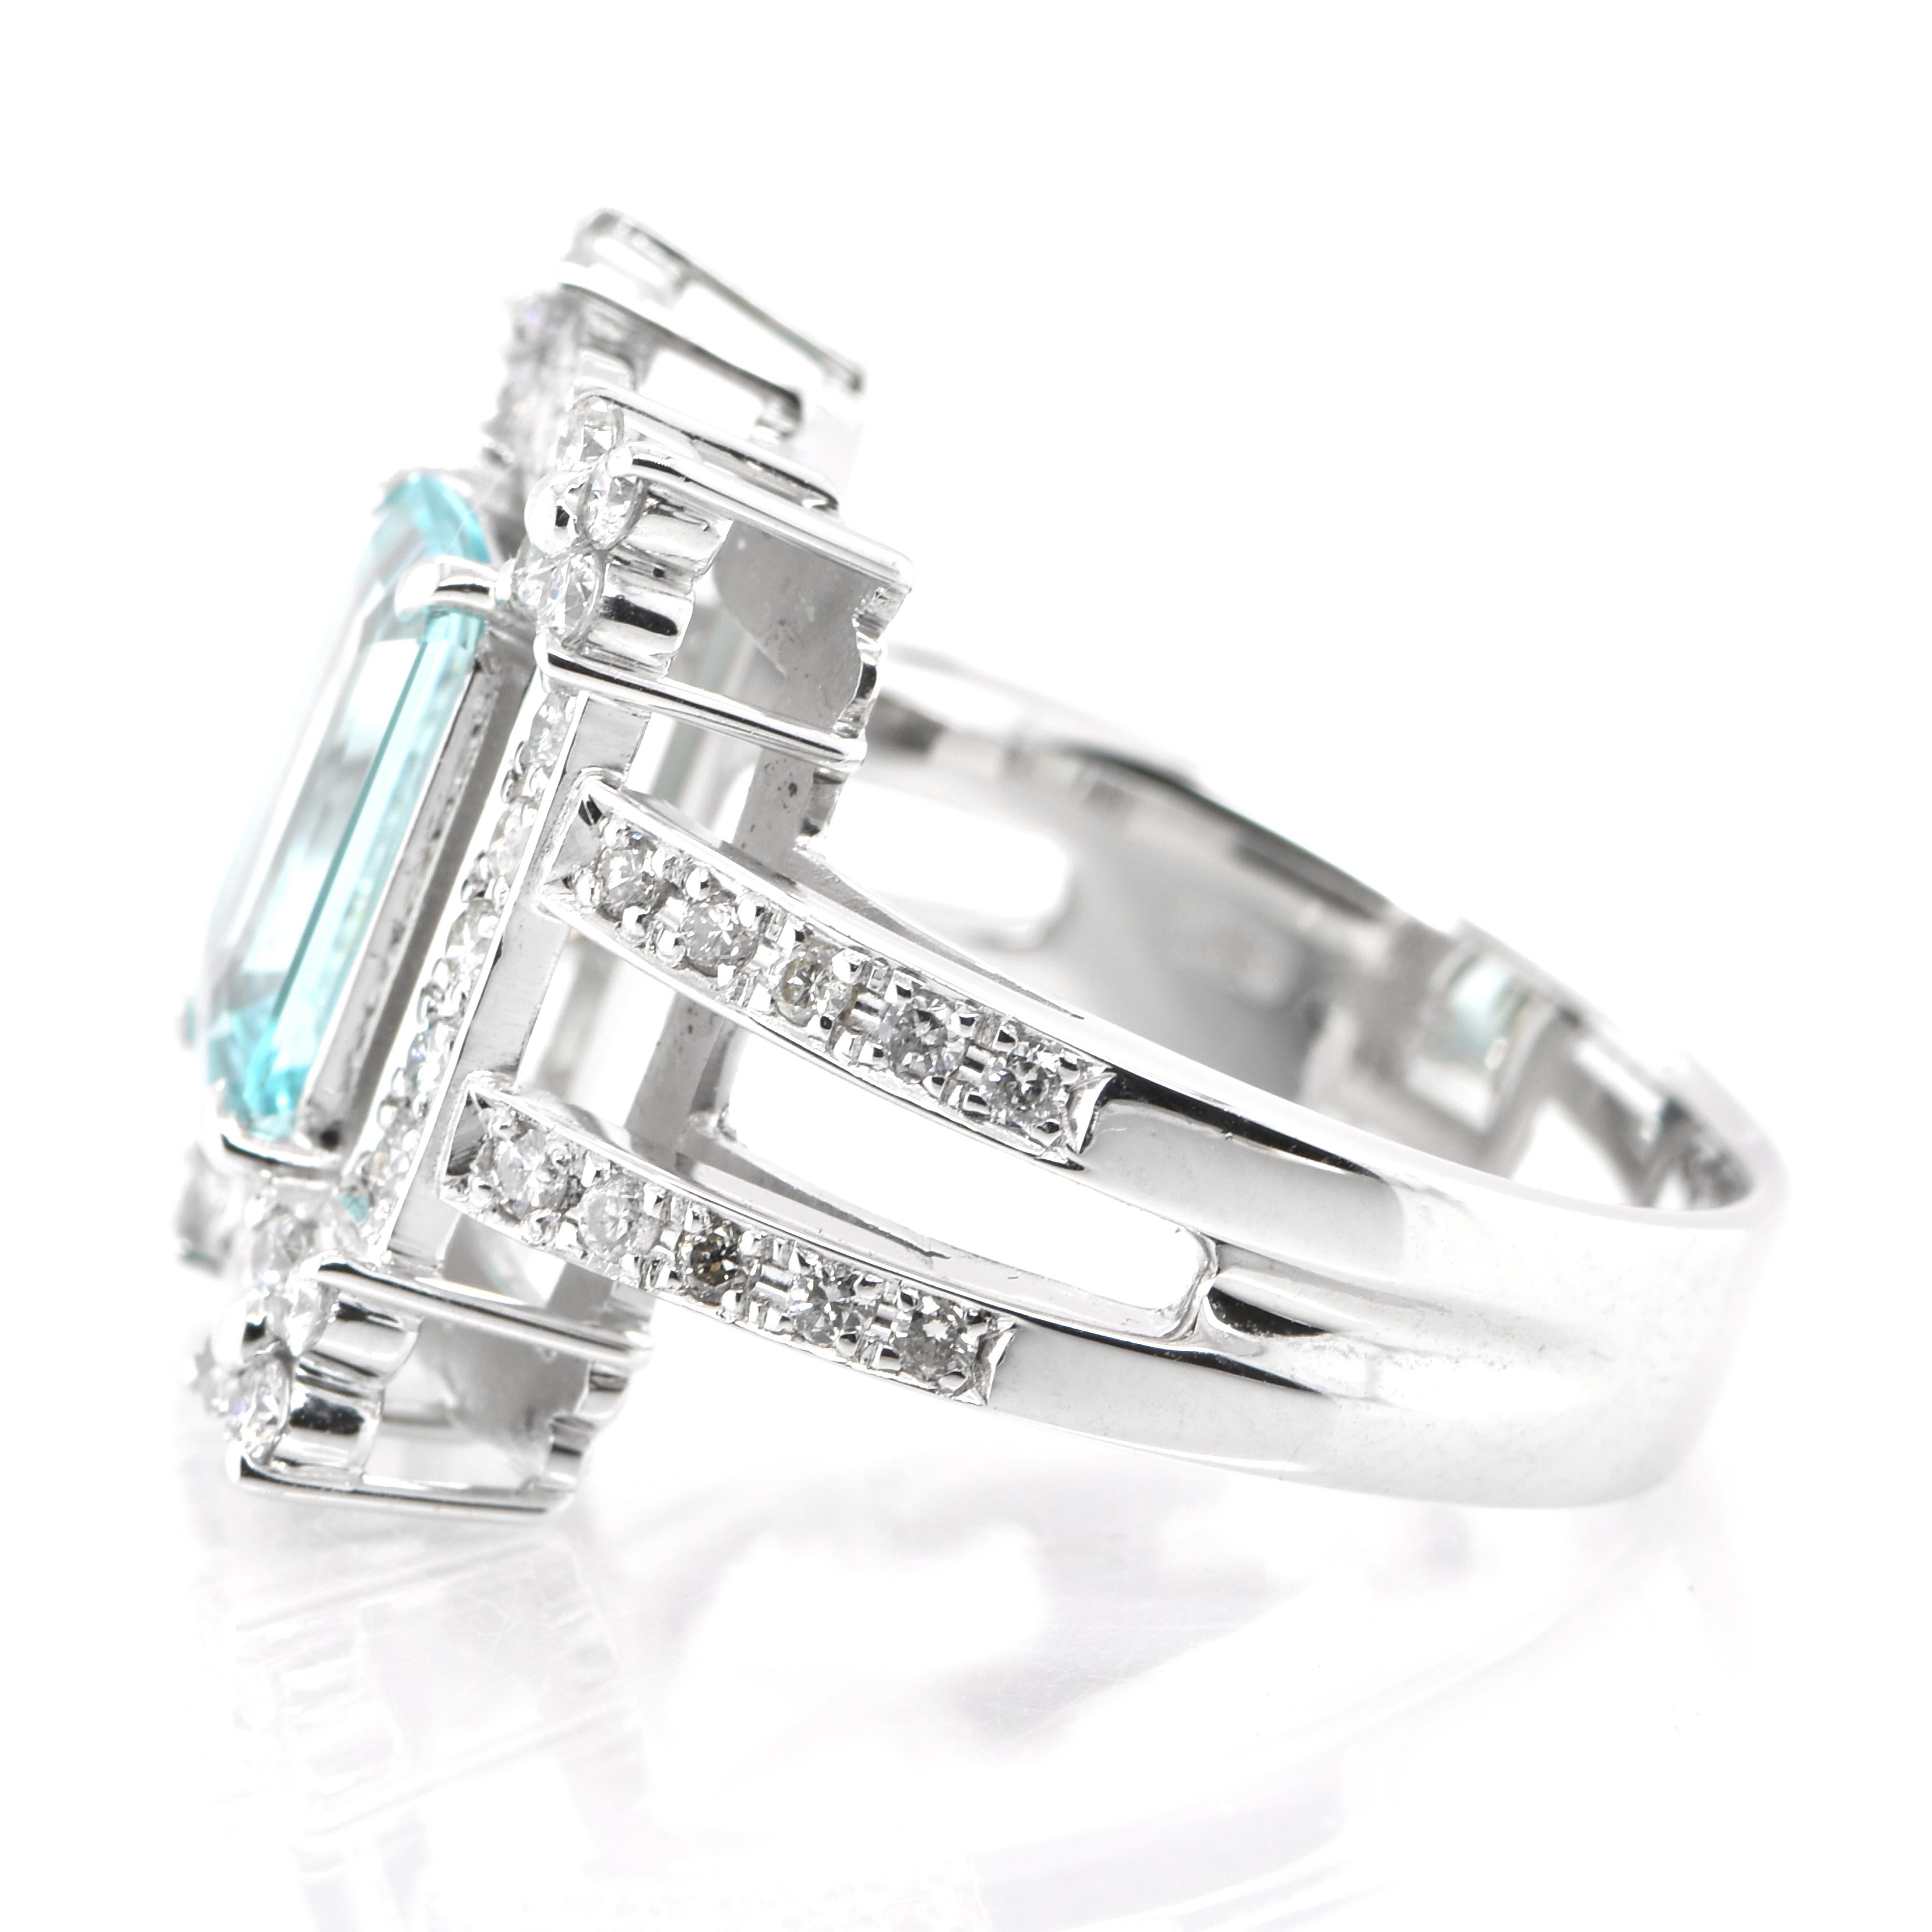 Octagon Cut 2.38 Carat Natural Paraiba Tourmaline and Diamond Ring Set in 18K White Gold For Sale